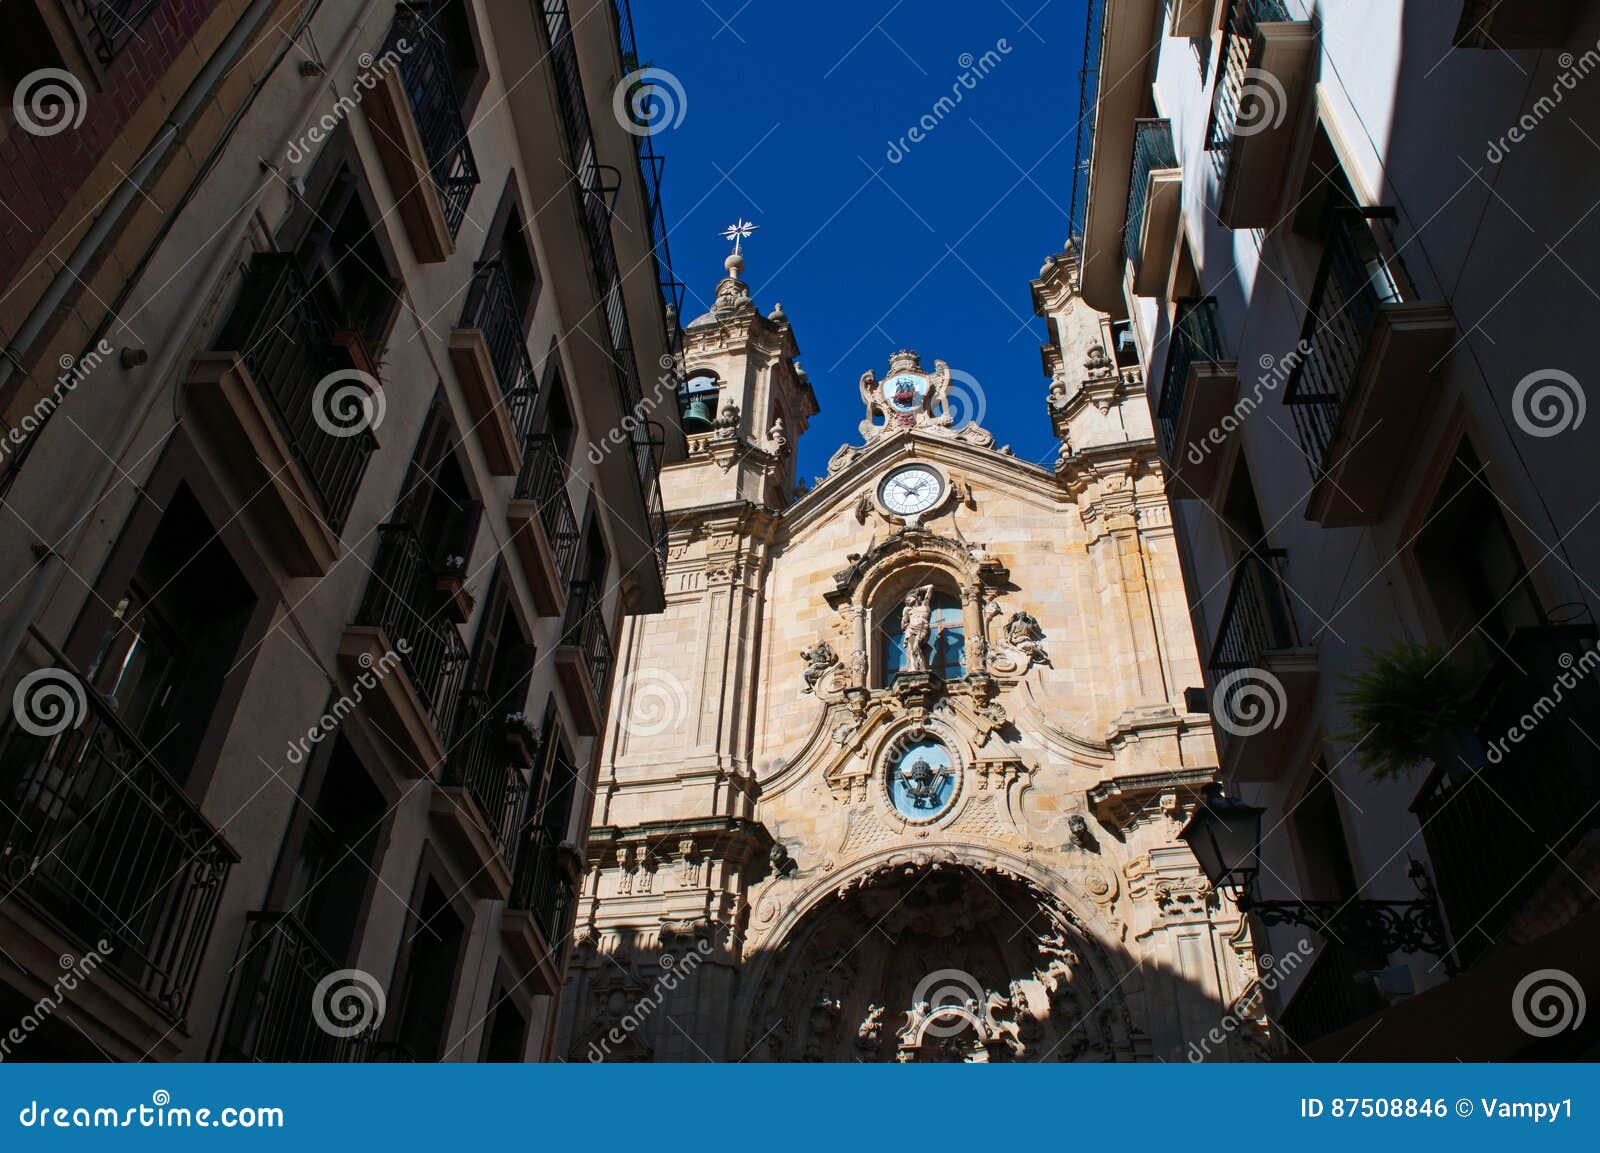 skyline, the church of saint mary of the chorus, details, baroque, san sebastian, bay of biscay, basque country, spain, europe